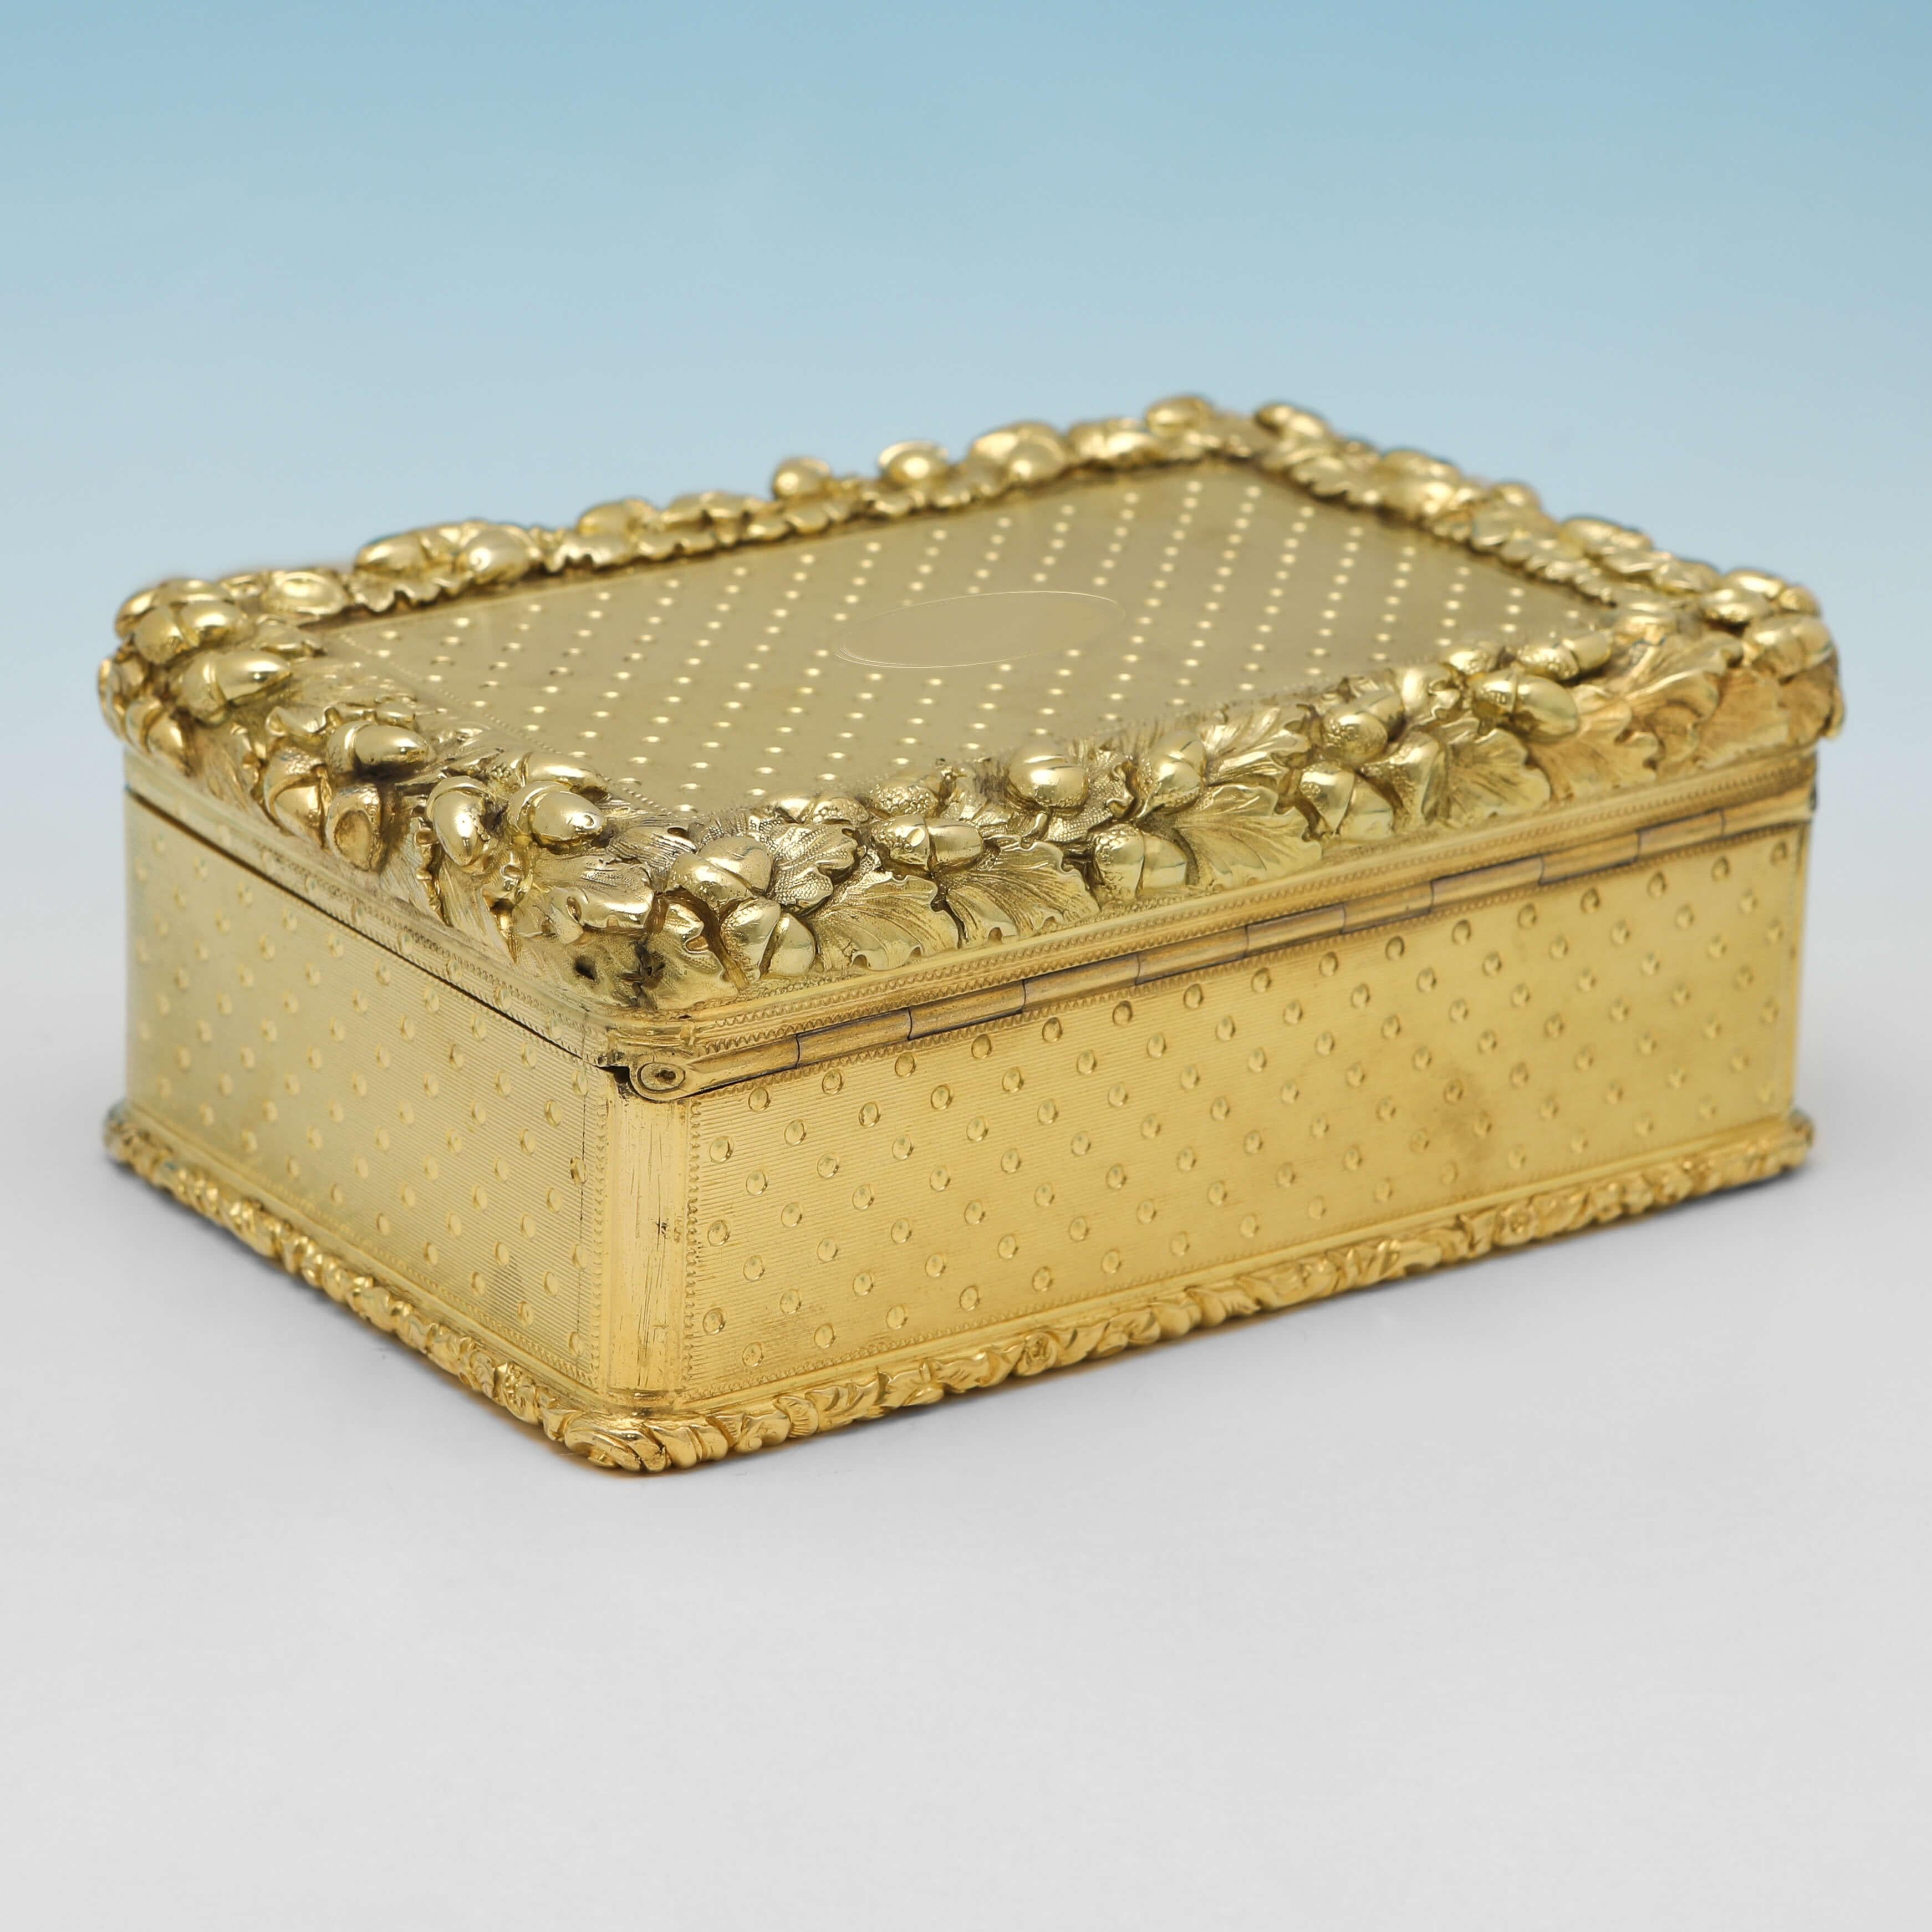 Hallmarked in London in 1853 by Thomas Edwards, this very handsome, Victorian, Antique Sterling Silver Snuff Box, features engine turned decoration, a cast border with acorn detailing, and original gilding. 

The snuff box measures 1.75